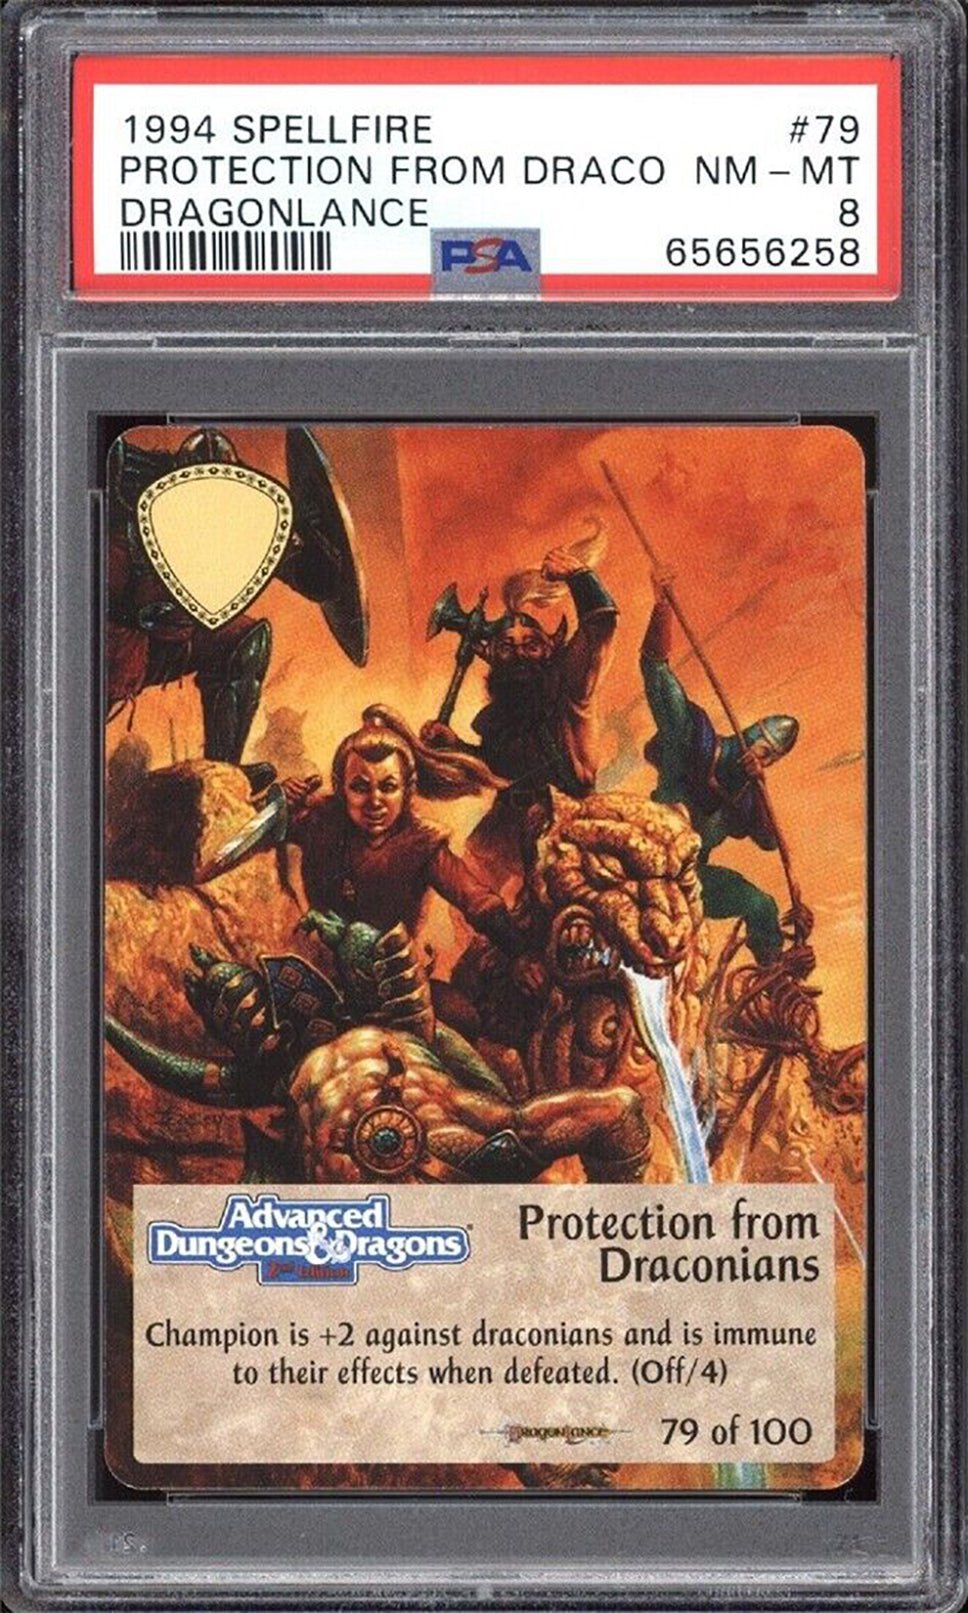 PROTECTION FROM DRACONIANS PSA 8 1994 Spellfire Dragonlance #79 Dungeons & Dragons Base Graded Cards - Hobby Gems